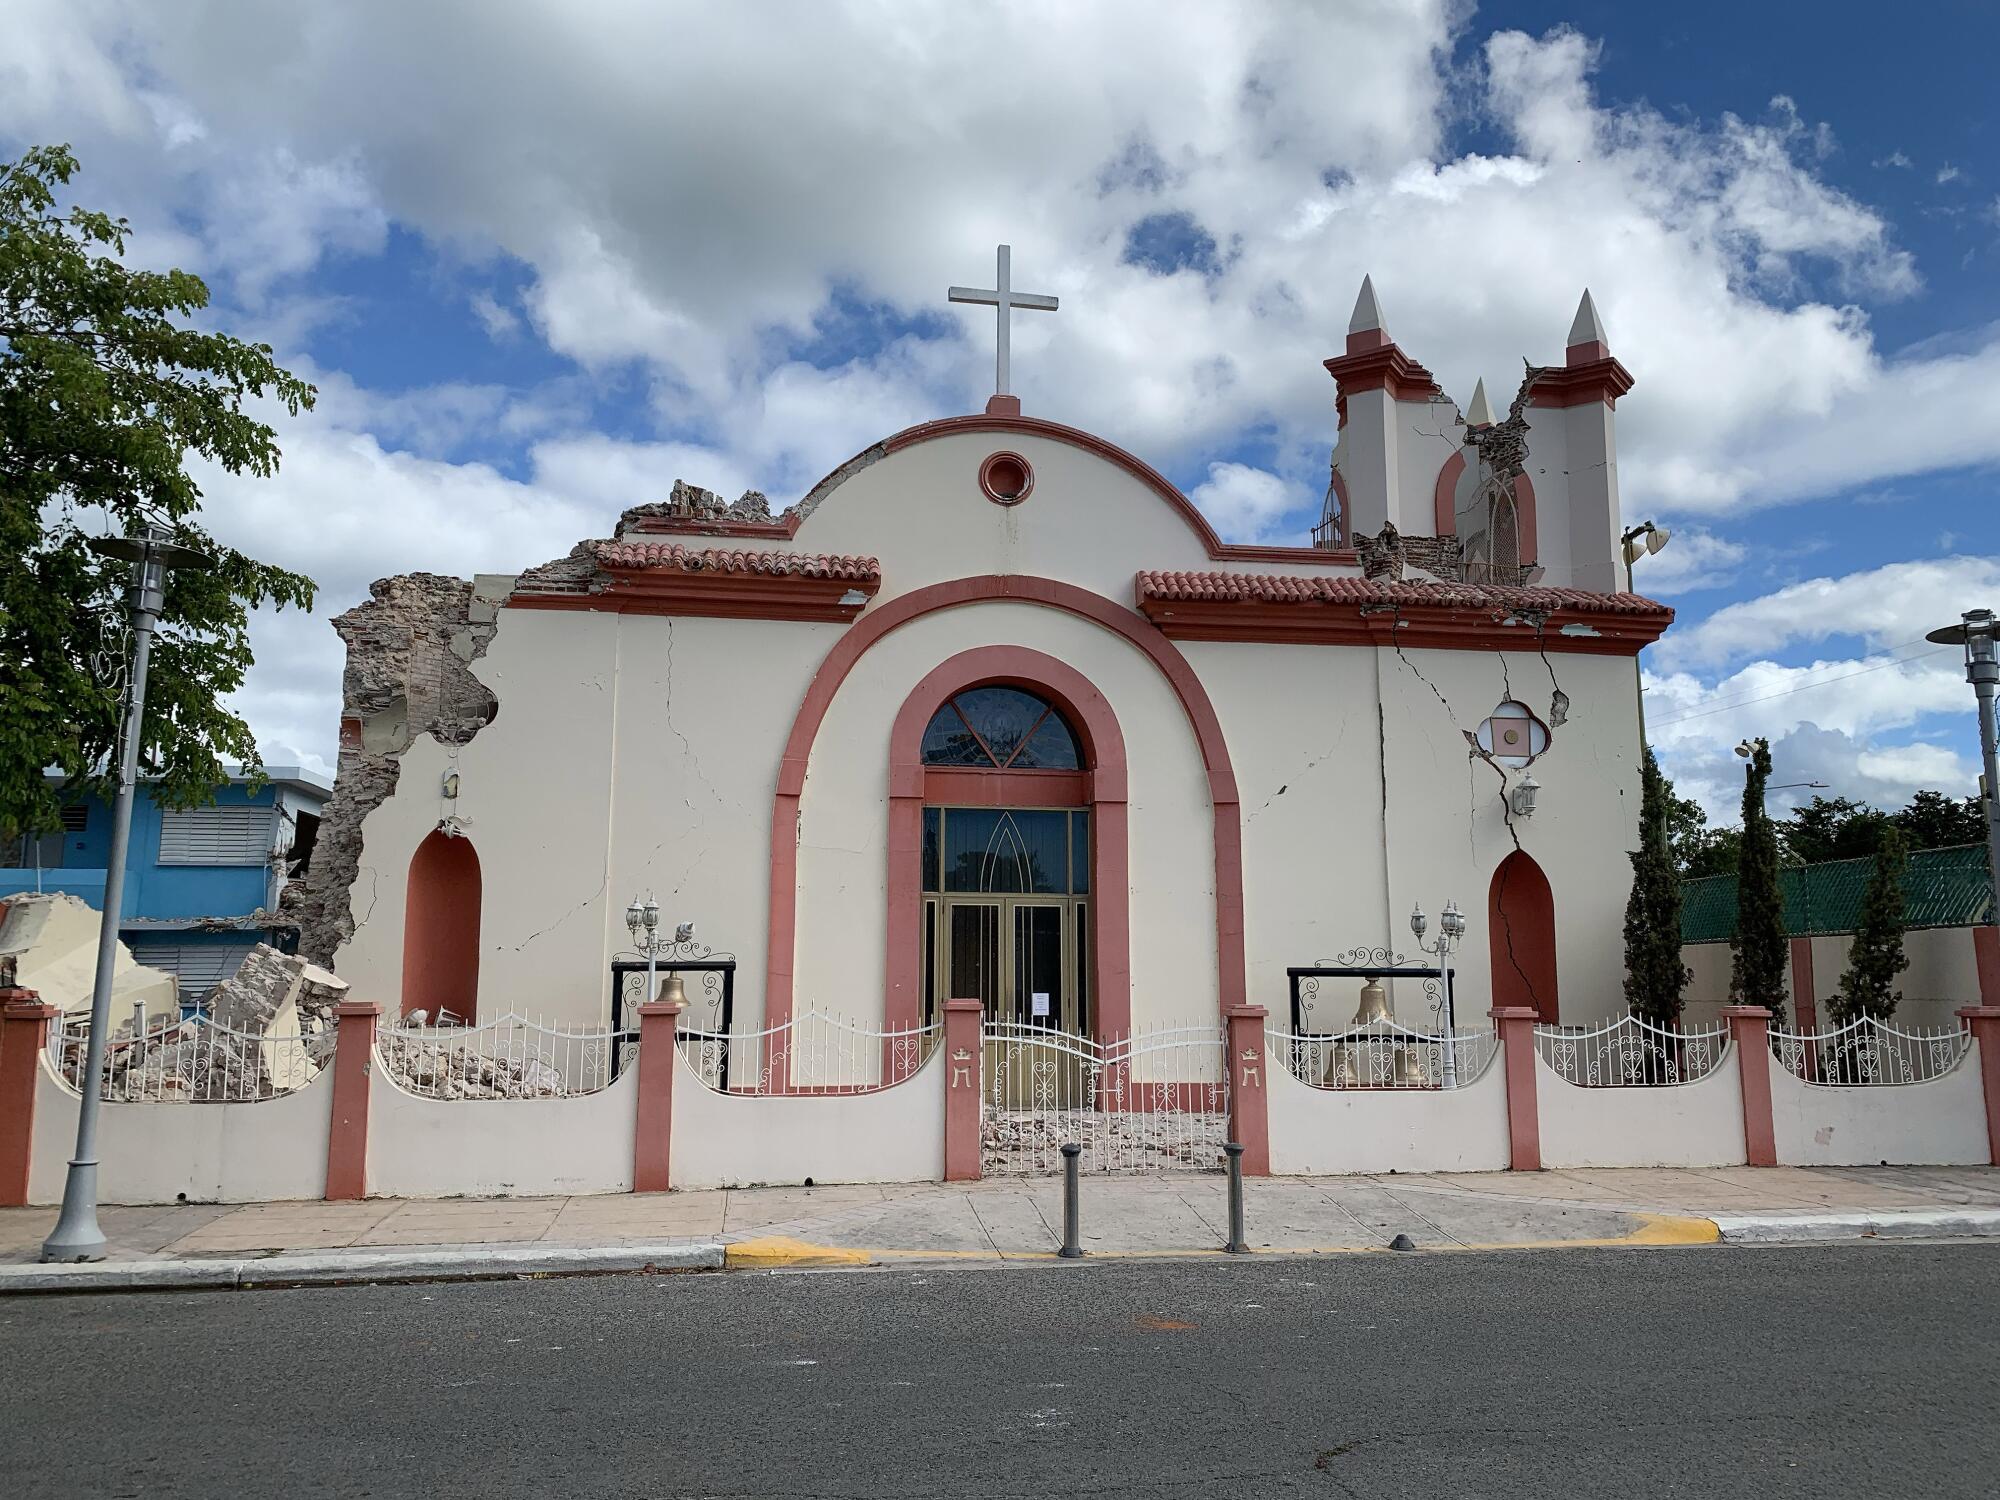 Parroquia Inmaculada Concepción church was heavily damaged after a 6.4 earthquake hit just south of the island in Guayanilla, Puerto Rico.